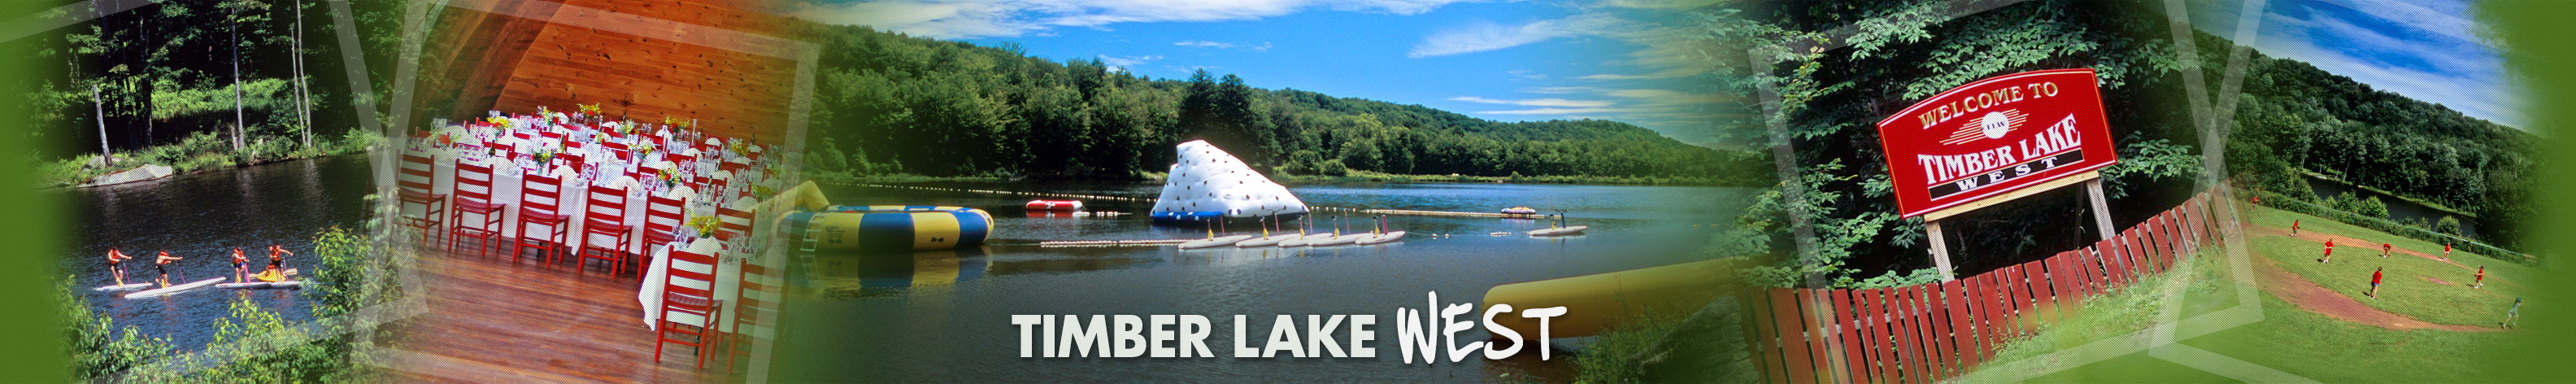 Events at Timber Lake West Summer Camp